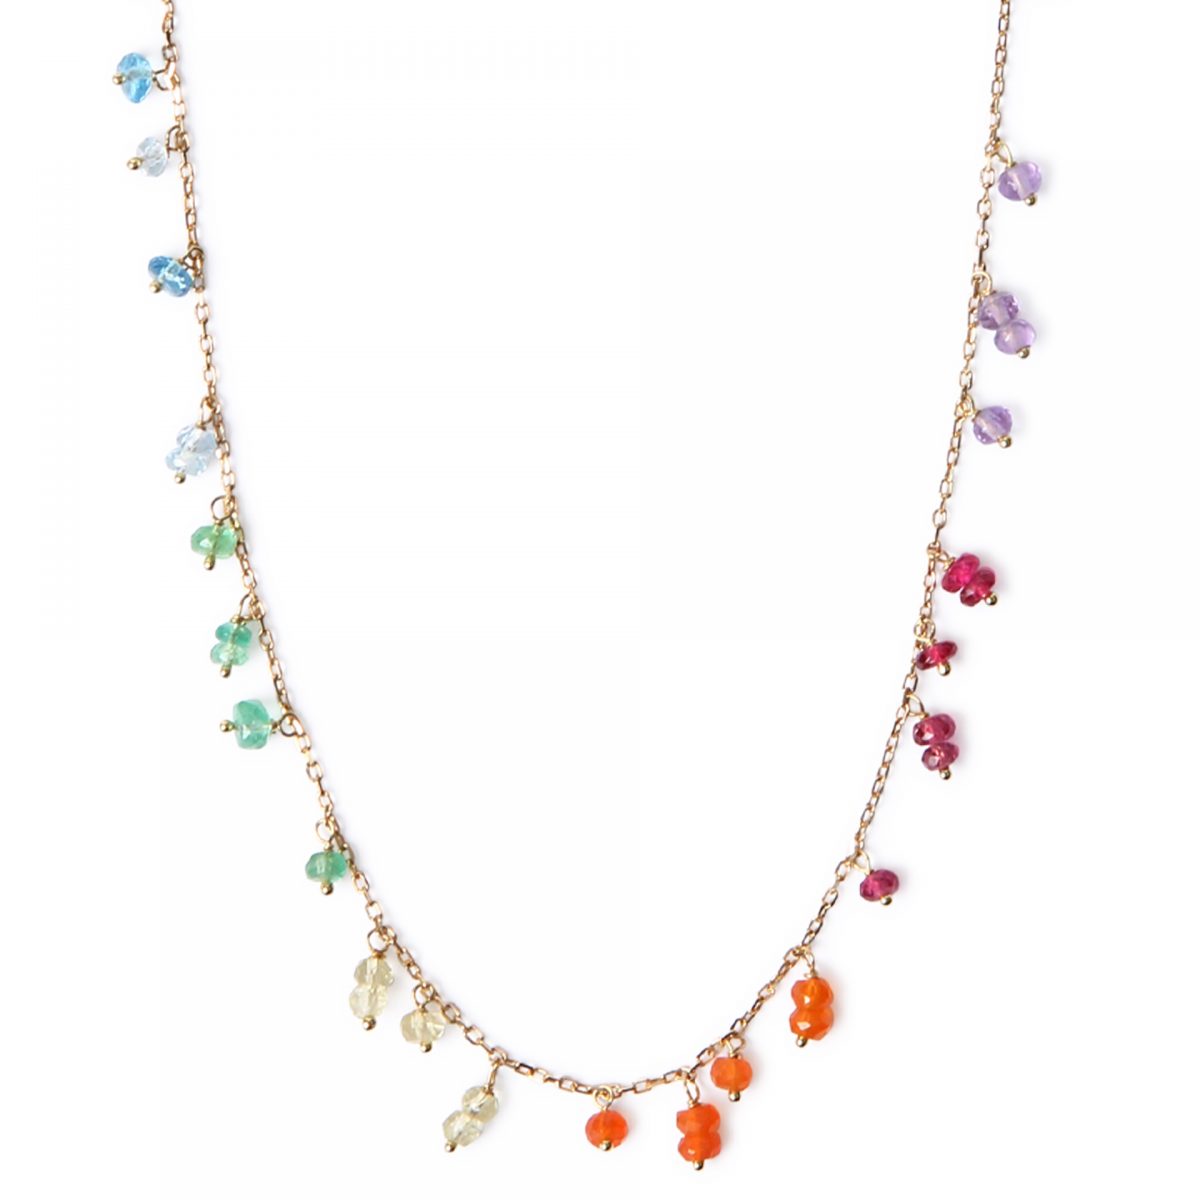 swp_necklace_3_241